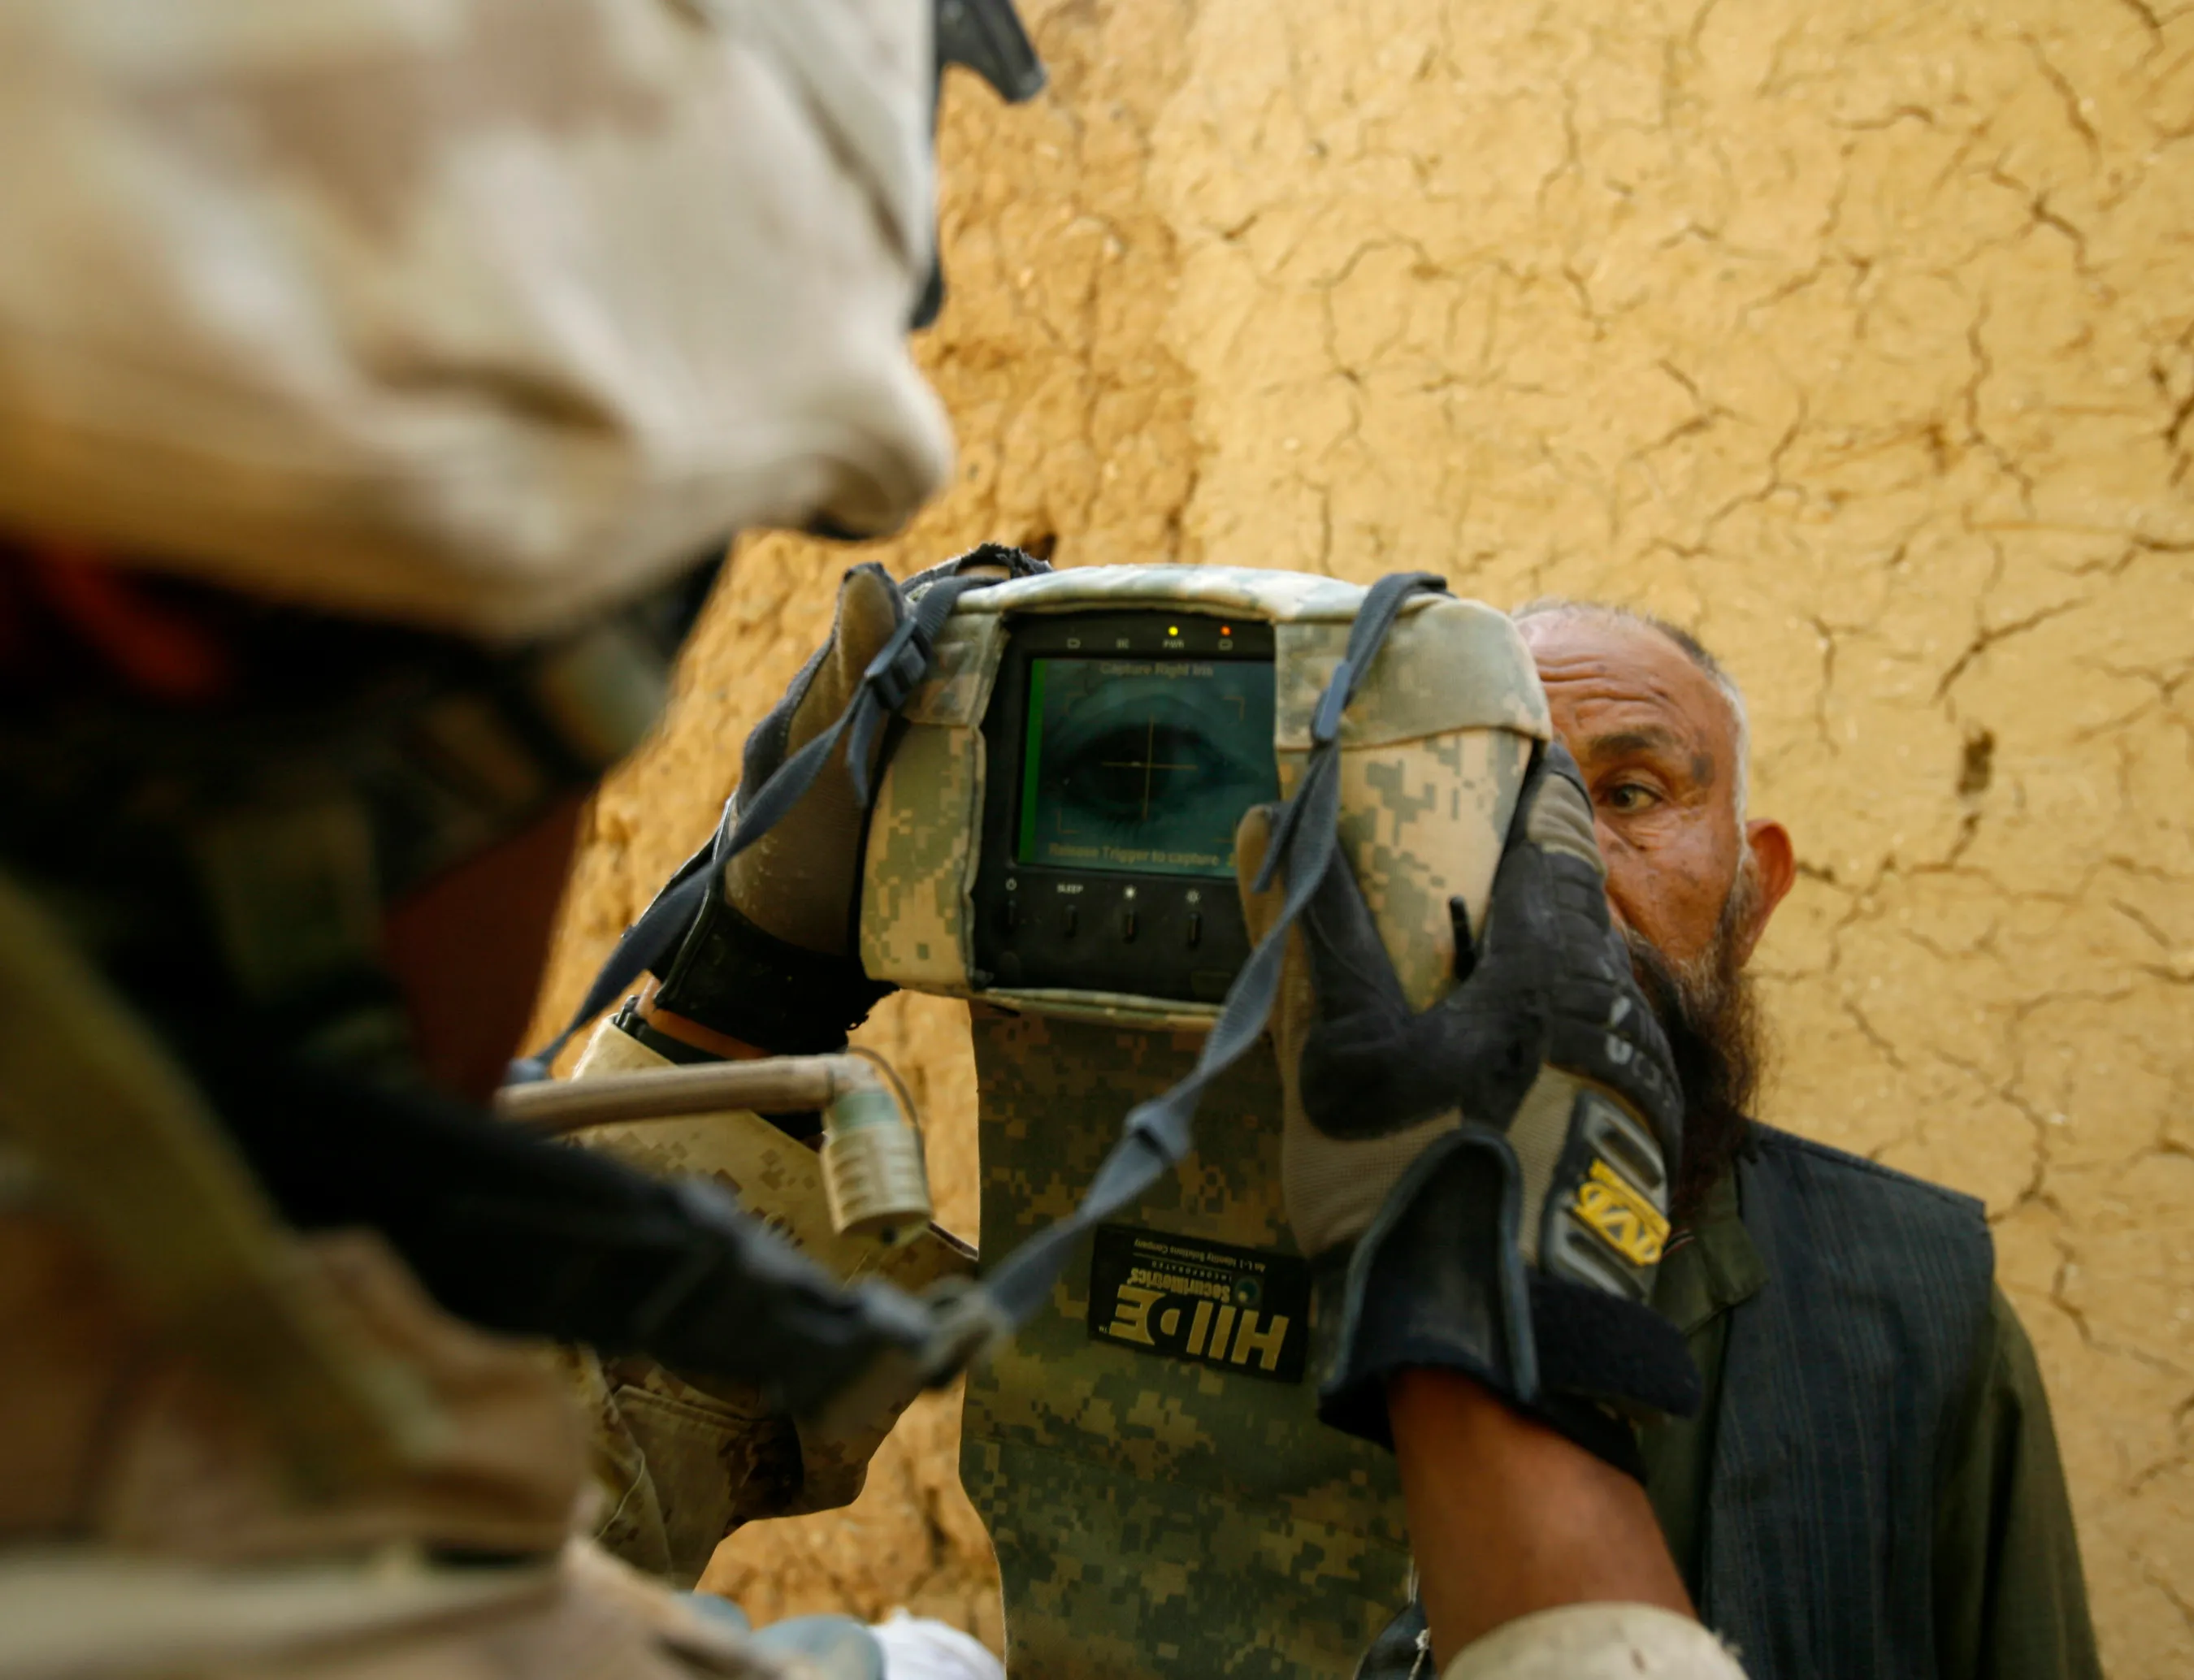 A U.S. Marine from Lima company 3rd Battalion 6th Marines conducts an eye scan with a HIIDE (Handheld Interagency Identity Detection Equipment) camera as a part of a census operation during a patrol around the area of Karez-e-Sayyidi in Helmand province April 4, 2010. REUTERS/Asmaa Waguih (AFGHANISTAN - Tags: CIVIL UNREST MILITARY)